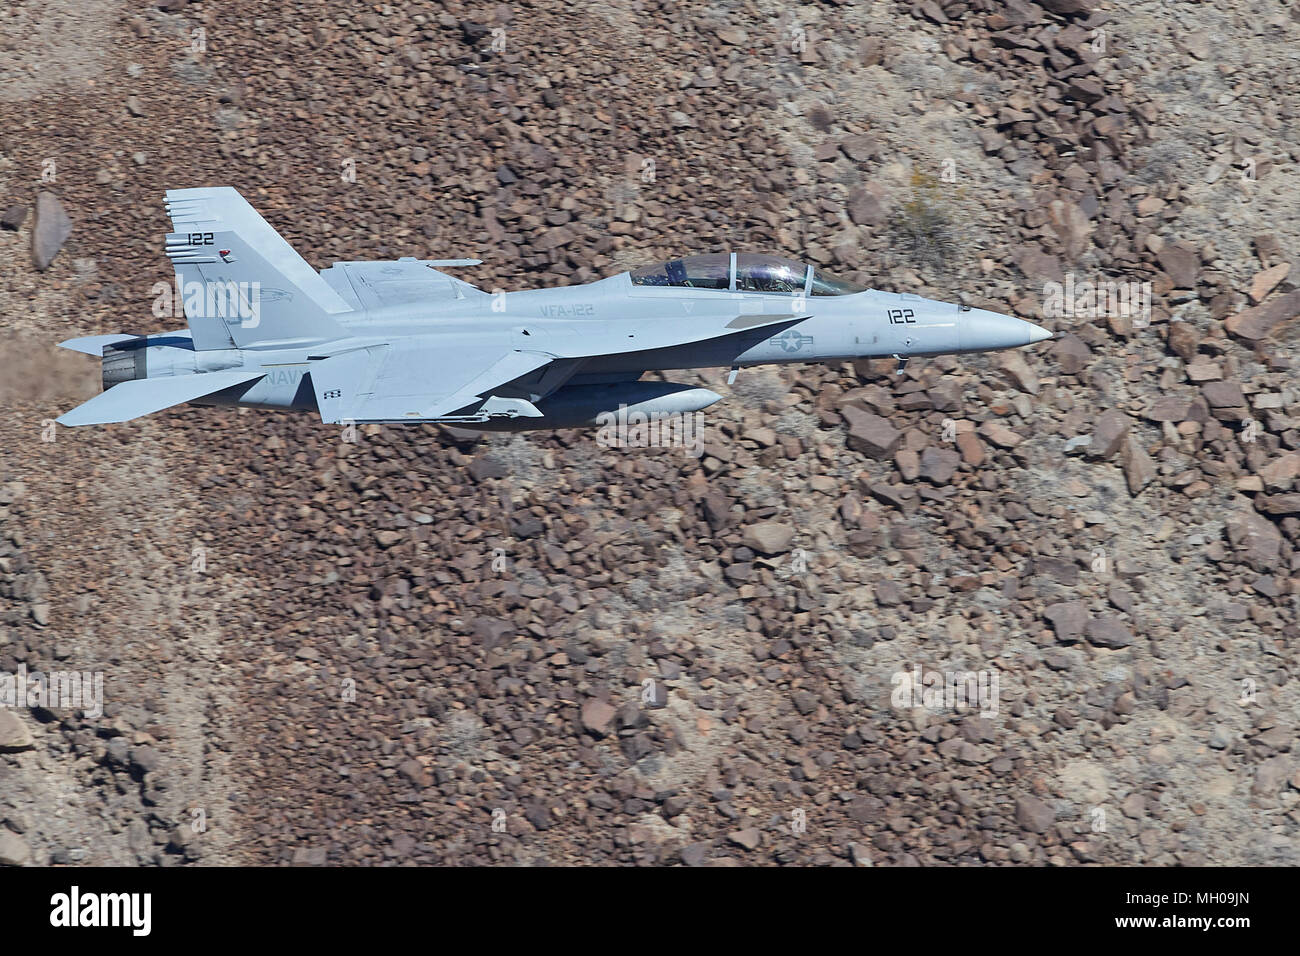 Close Up In Profile Photo Of A United States Navy F/A-18F Super Hornet Jet Fighter Flying At Low Altitude Through Rainbow Canyon California, USA. Stock Photo